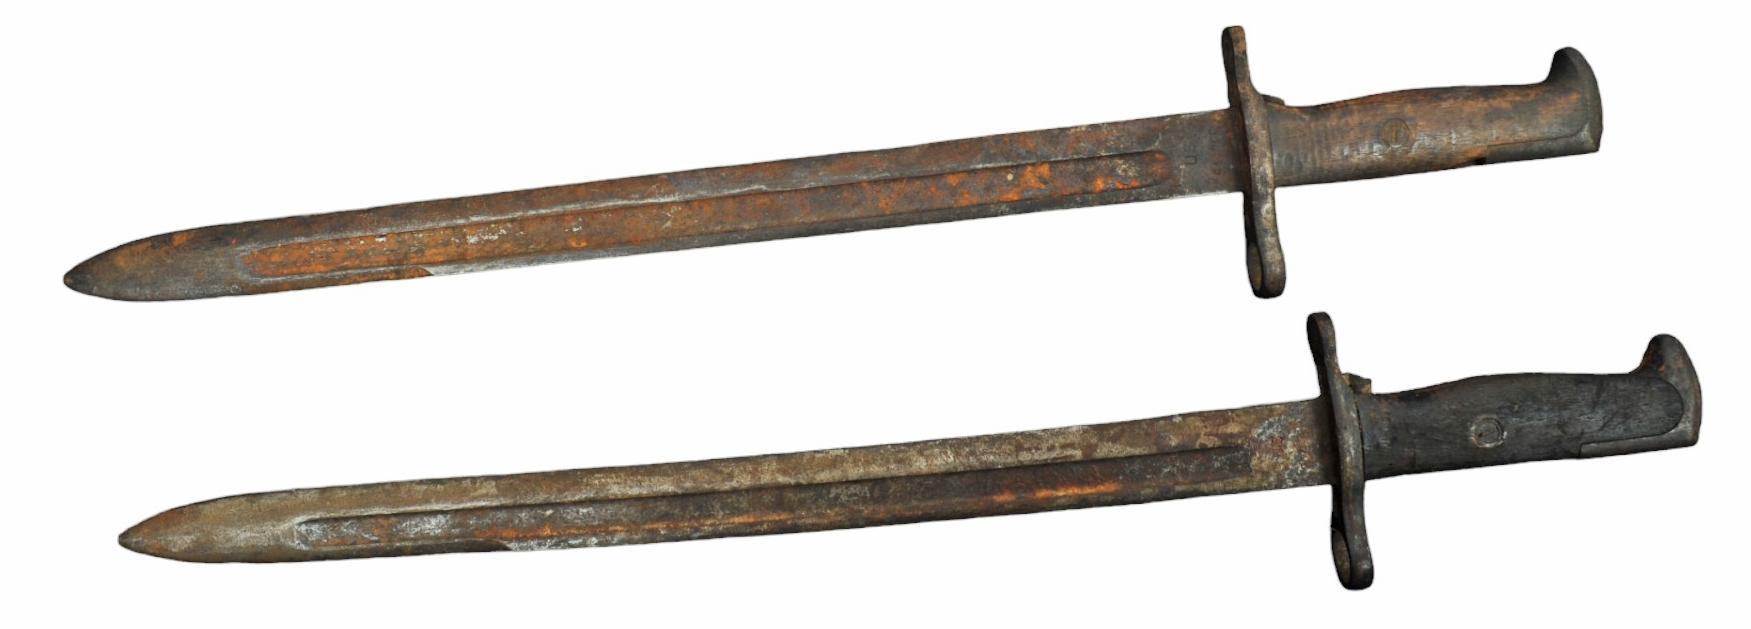 Two US Military WWI era M1905 Rifle Bayonets for the M1903 (JMT)